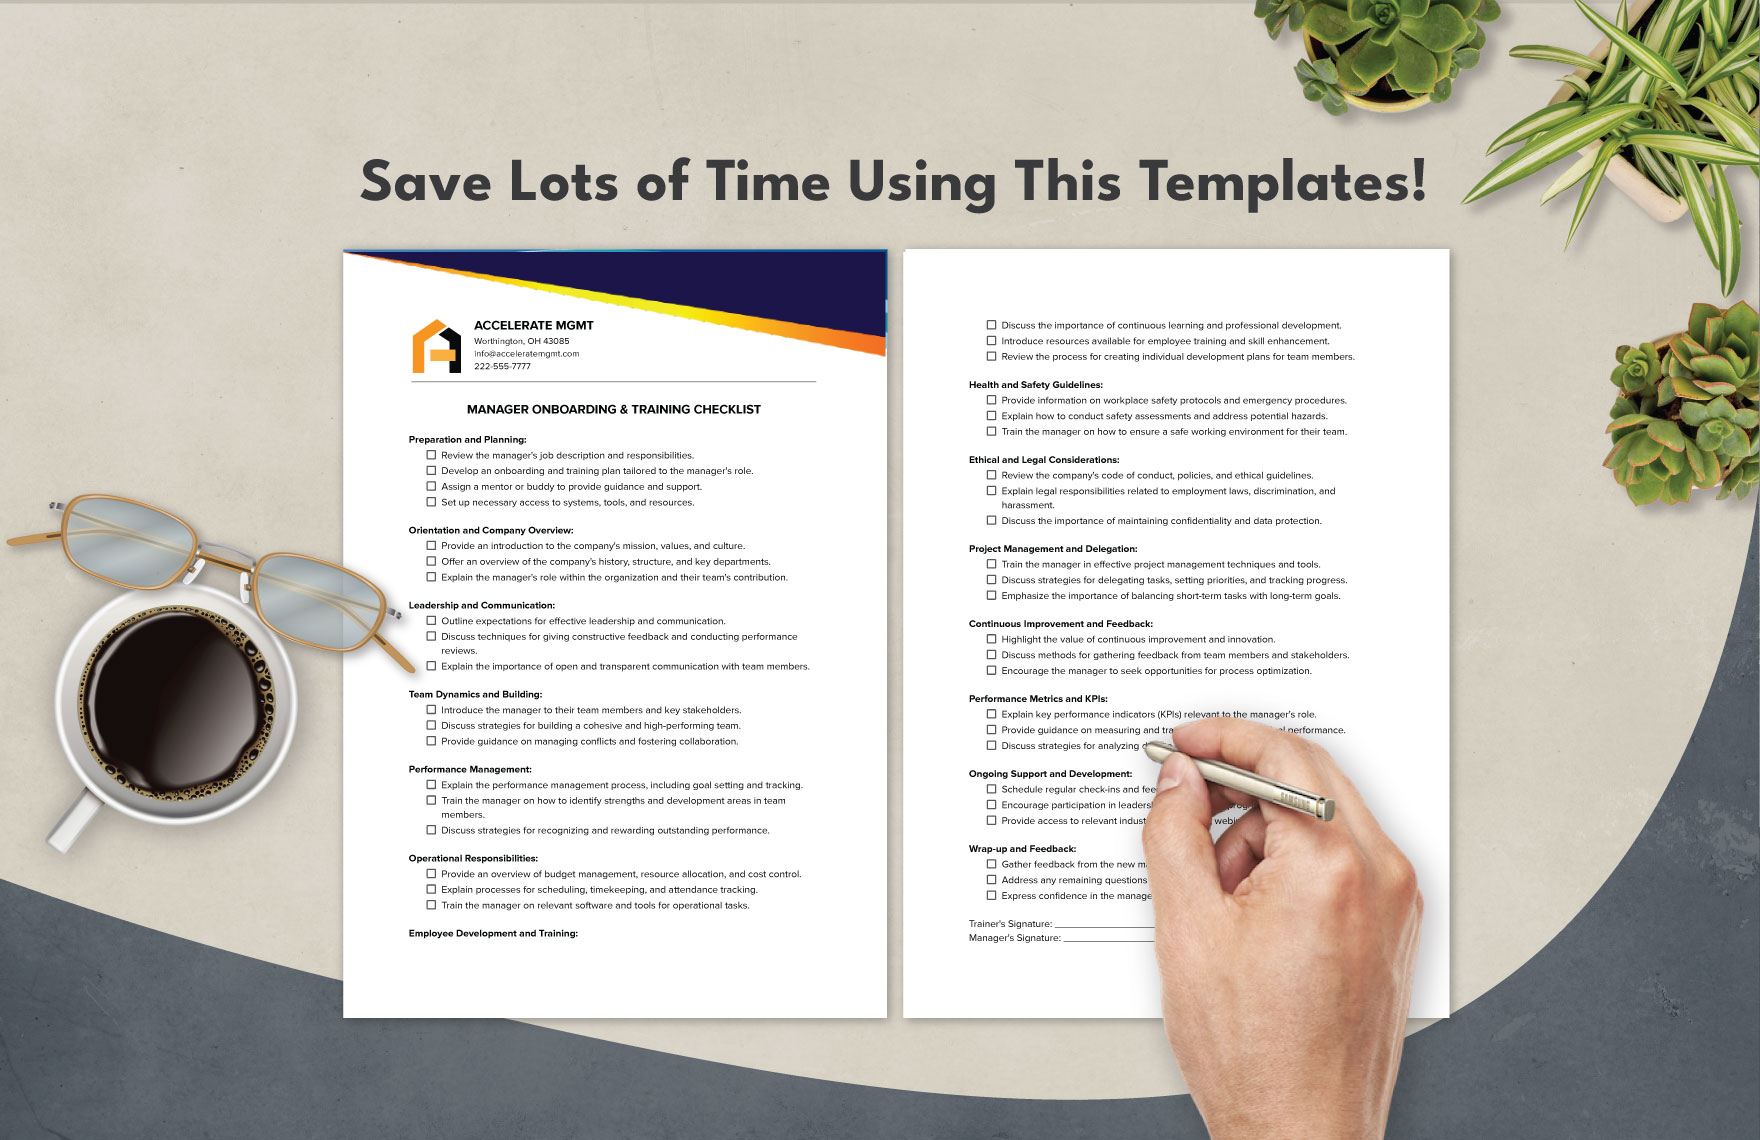 Manager Onboarding & Training Checklist Template